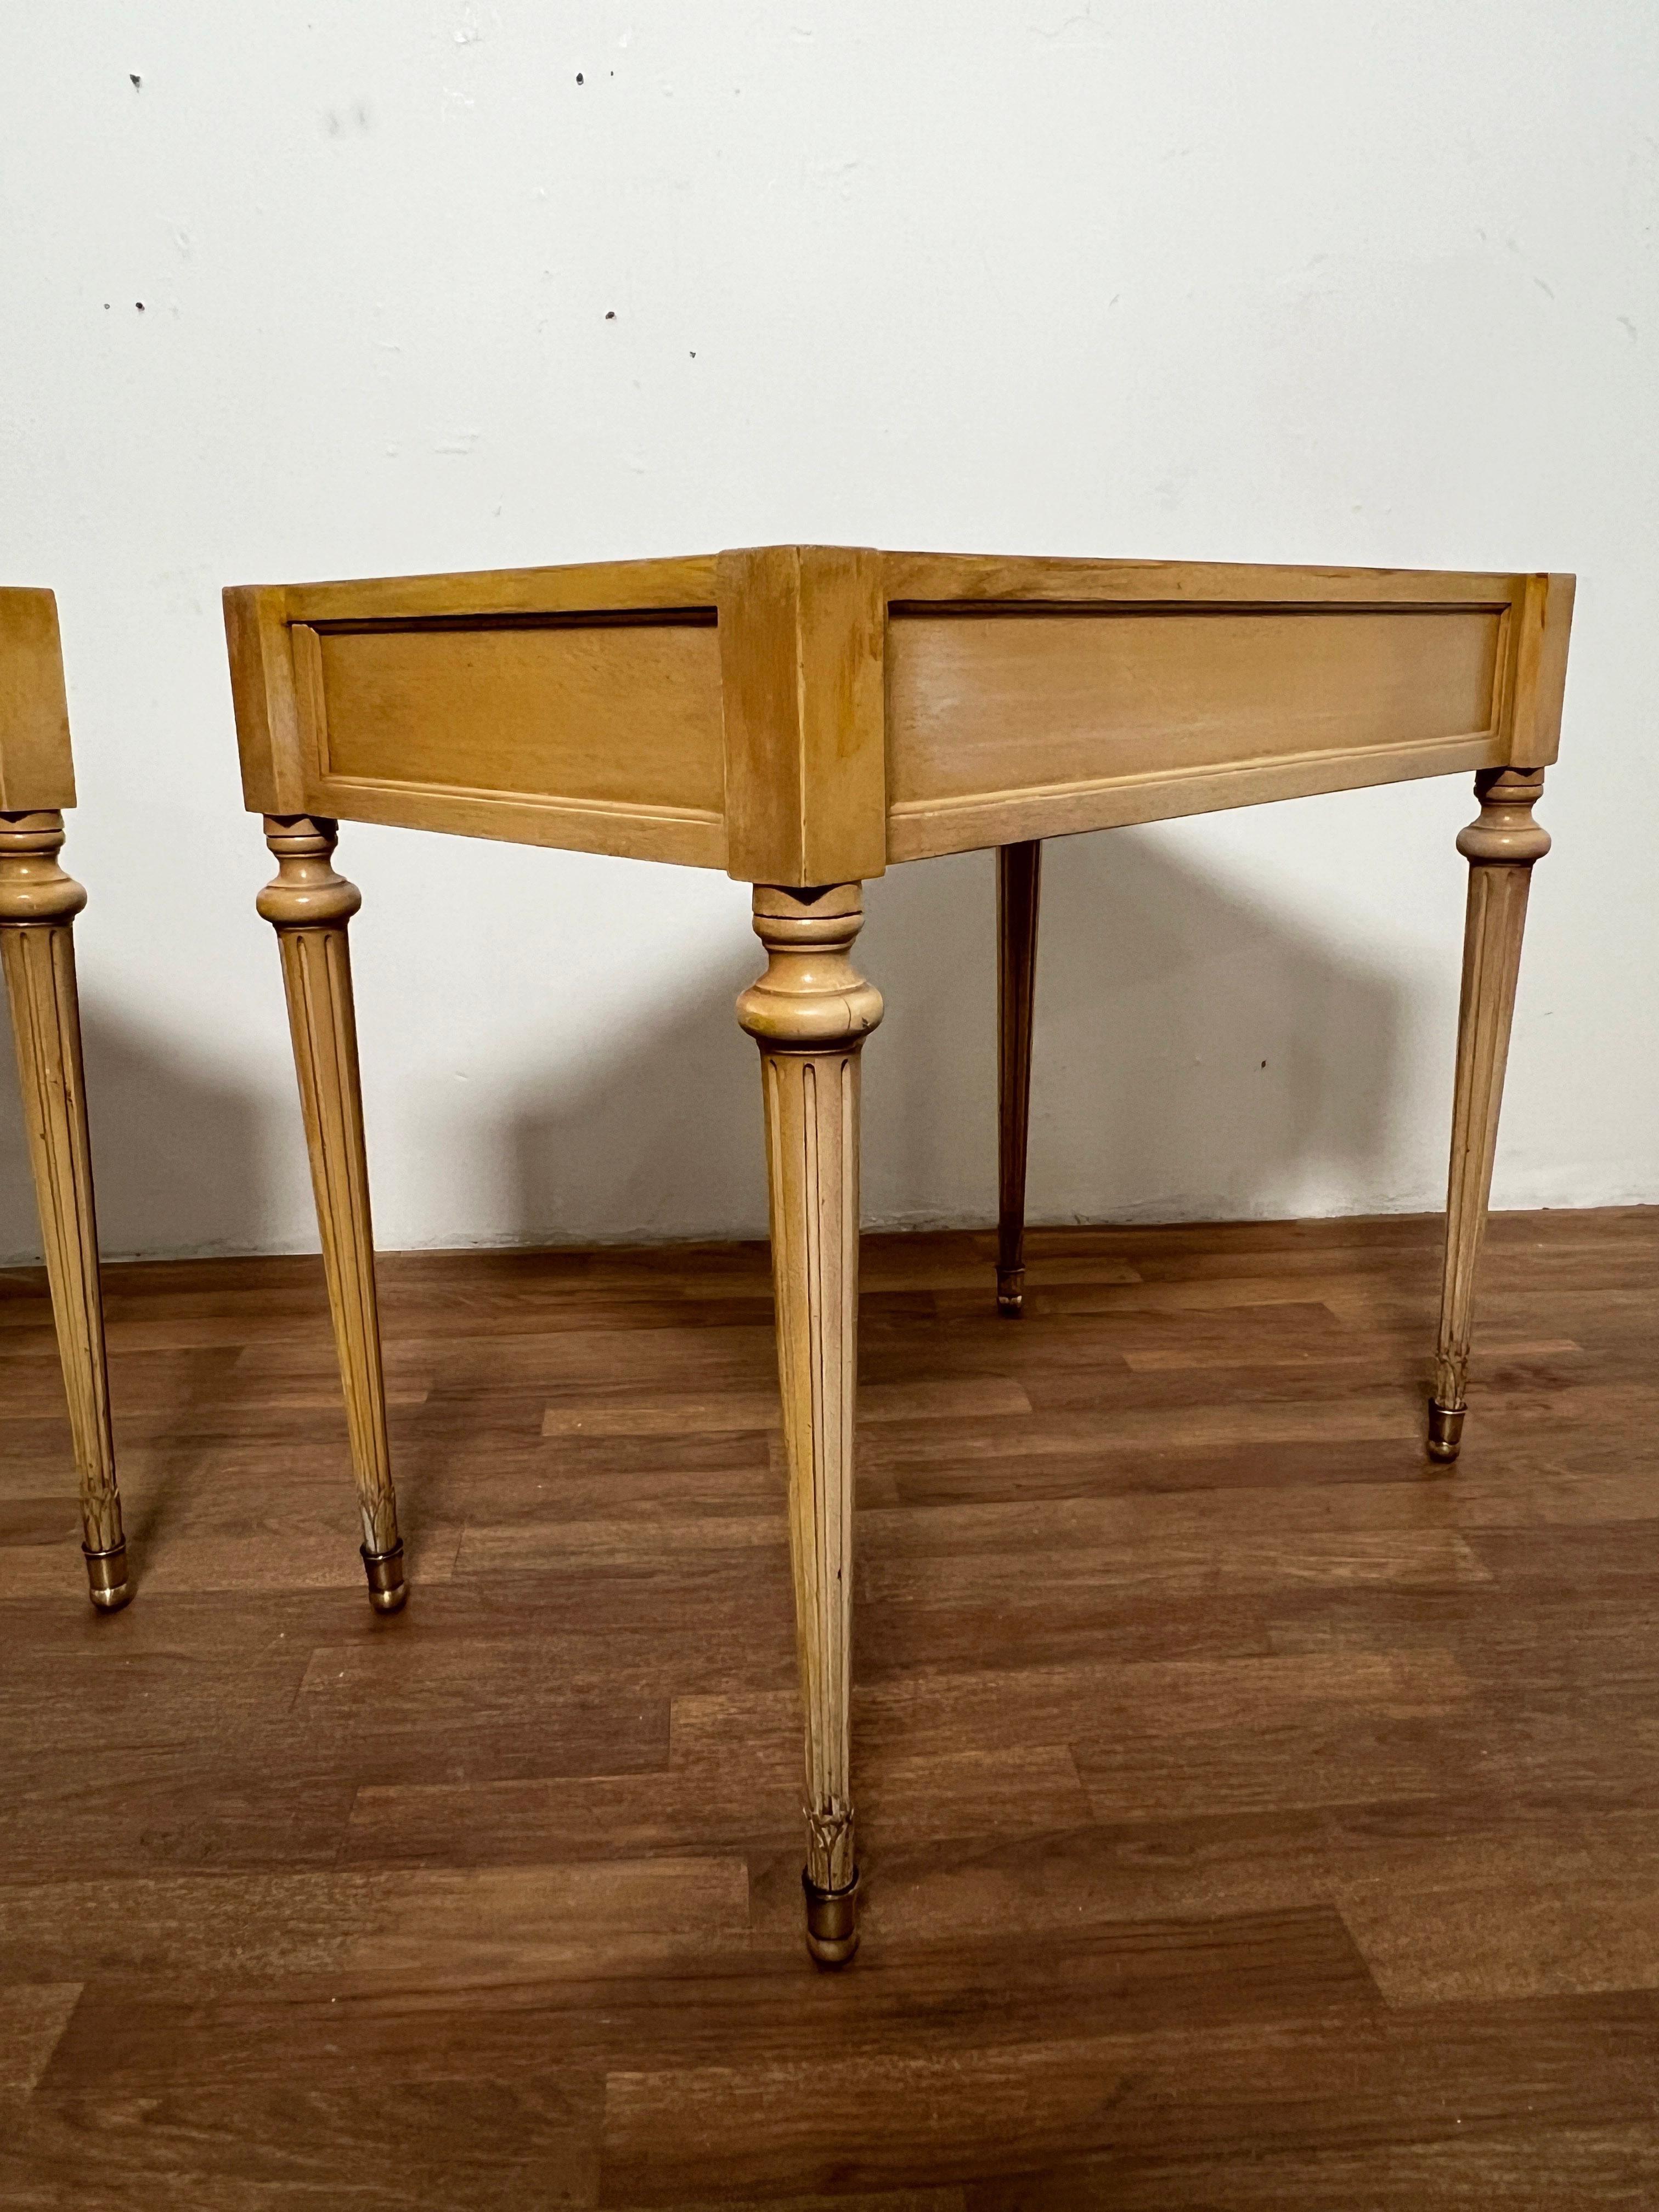 Pair of Louis XVI Style Side Tables With Leather Tops by F & G Furniture, 1950s For Sale 5